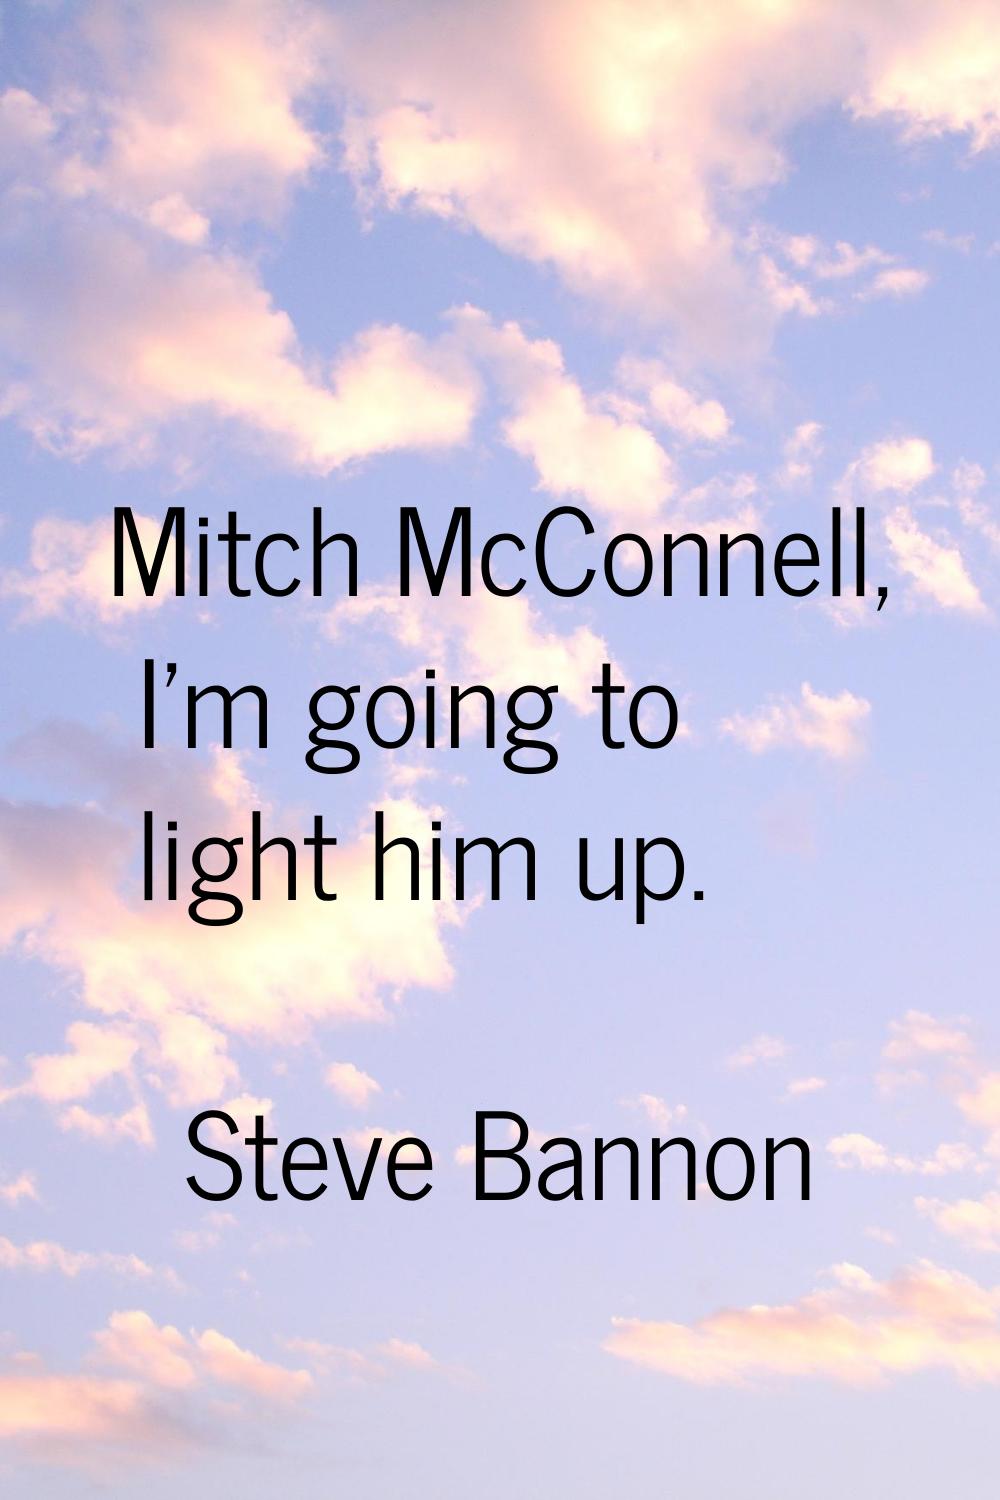 Mitch McConnell, I'm going to light him up.